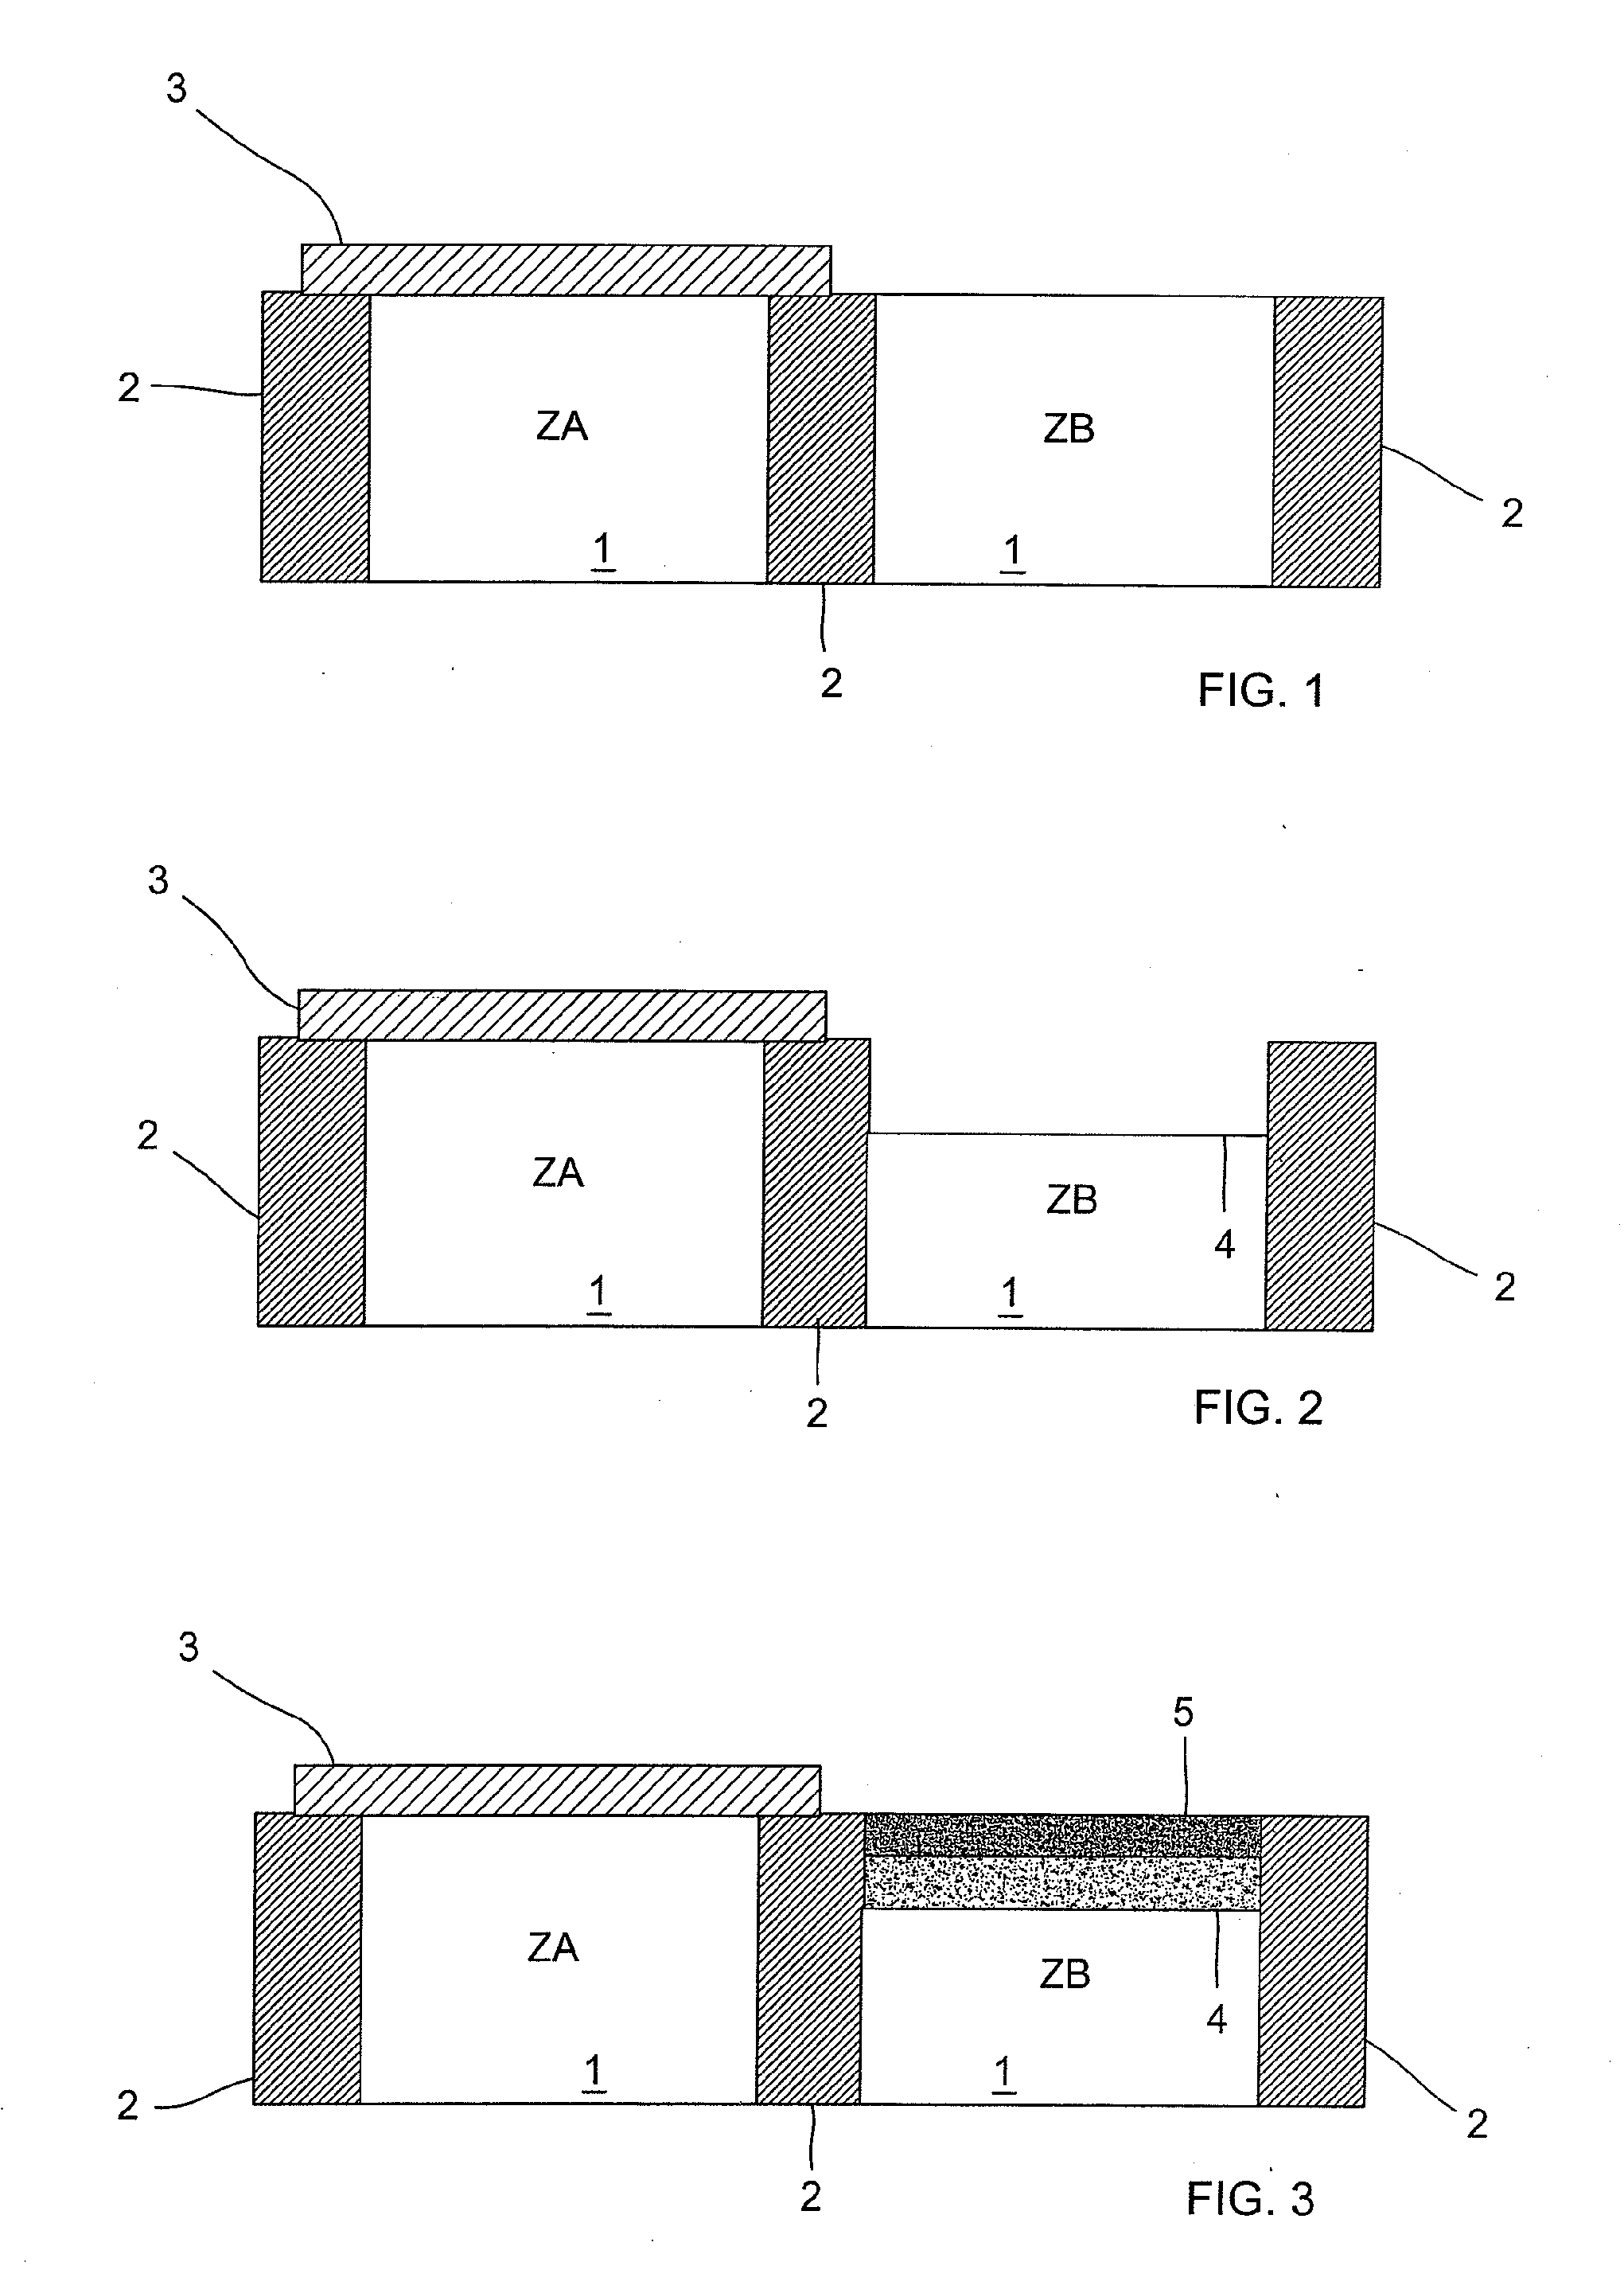 Method for integrating silicon-on-nothing devices with standard CMOS devices